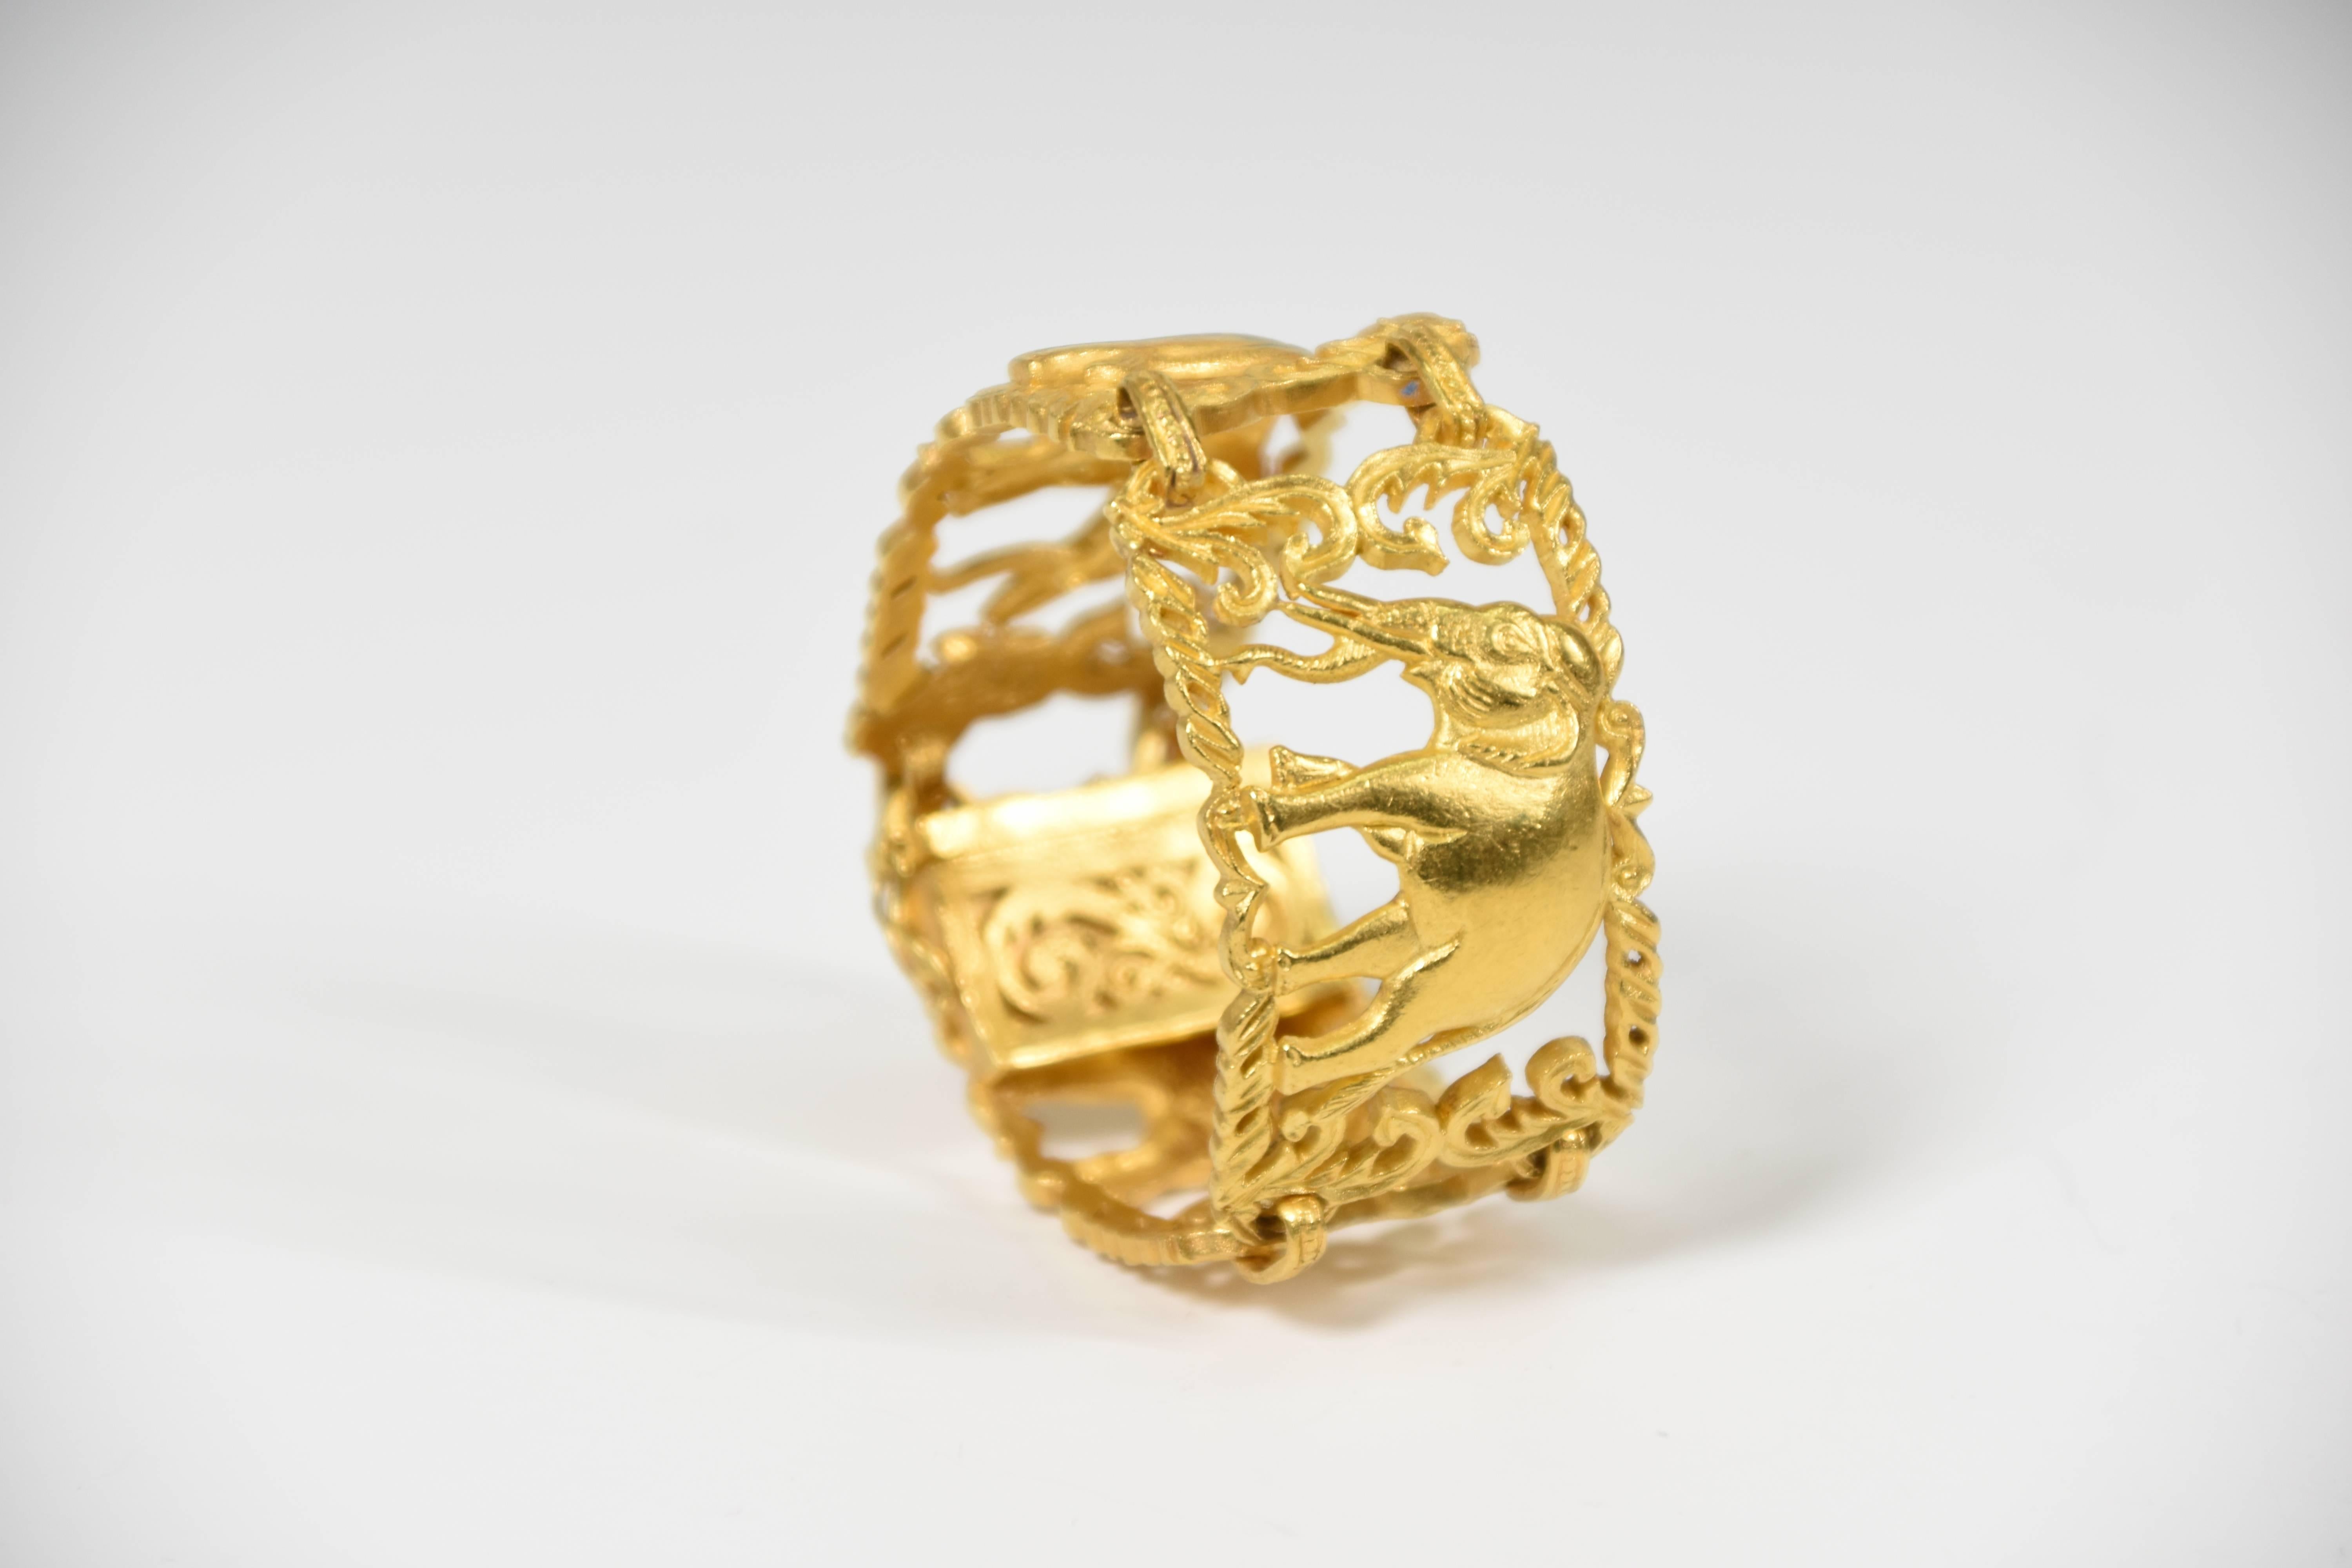 Anglo-Indian Cartier-Style 23 Carat Yellow Gold Cuff Bracelet of Elephants